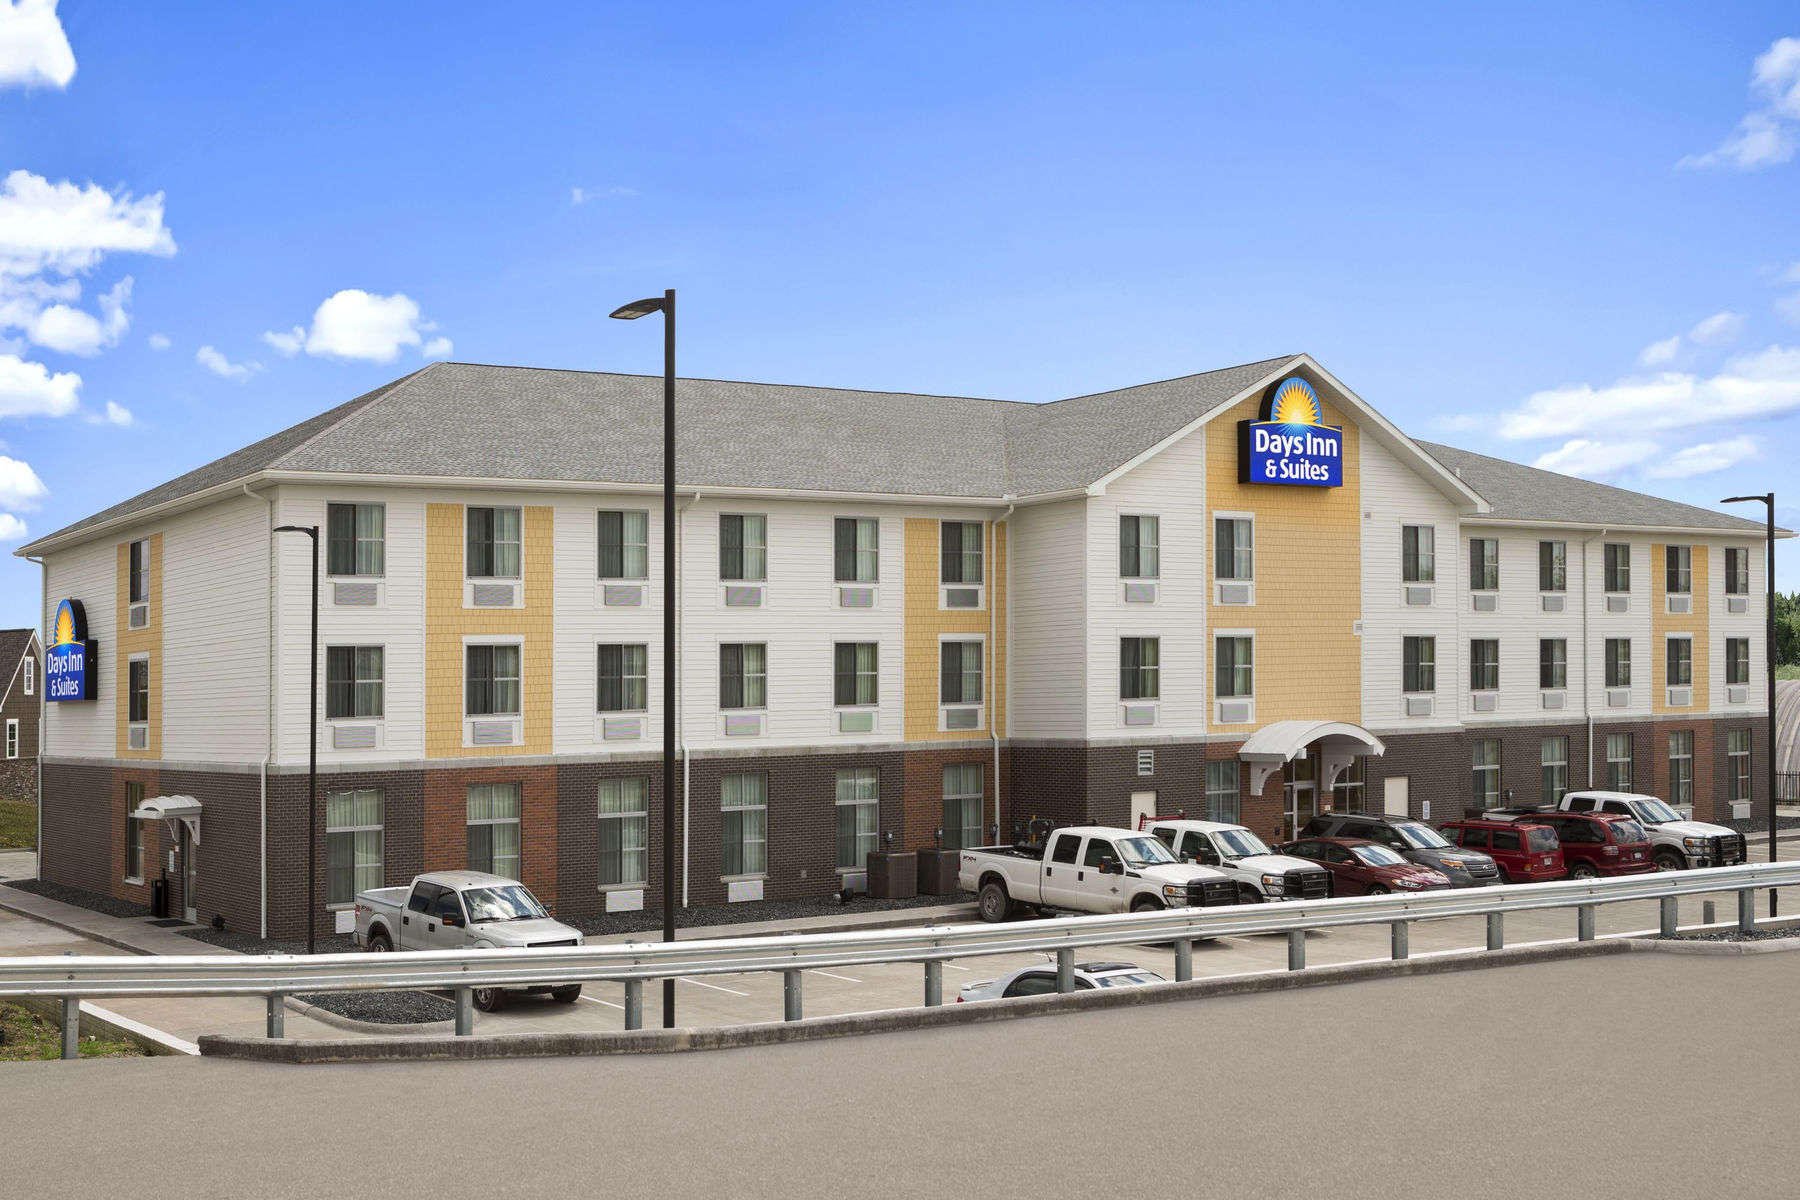 Photo of Days Inn & Suites Caldwell, Caldwell, OH